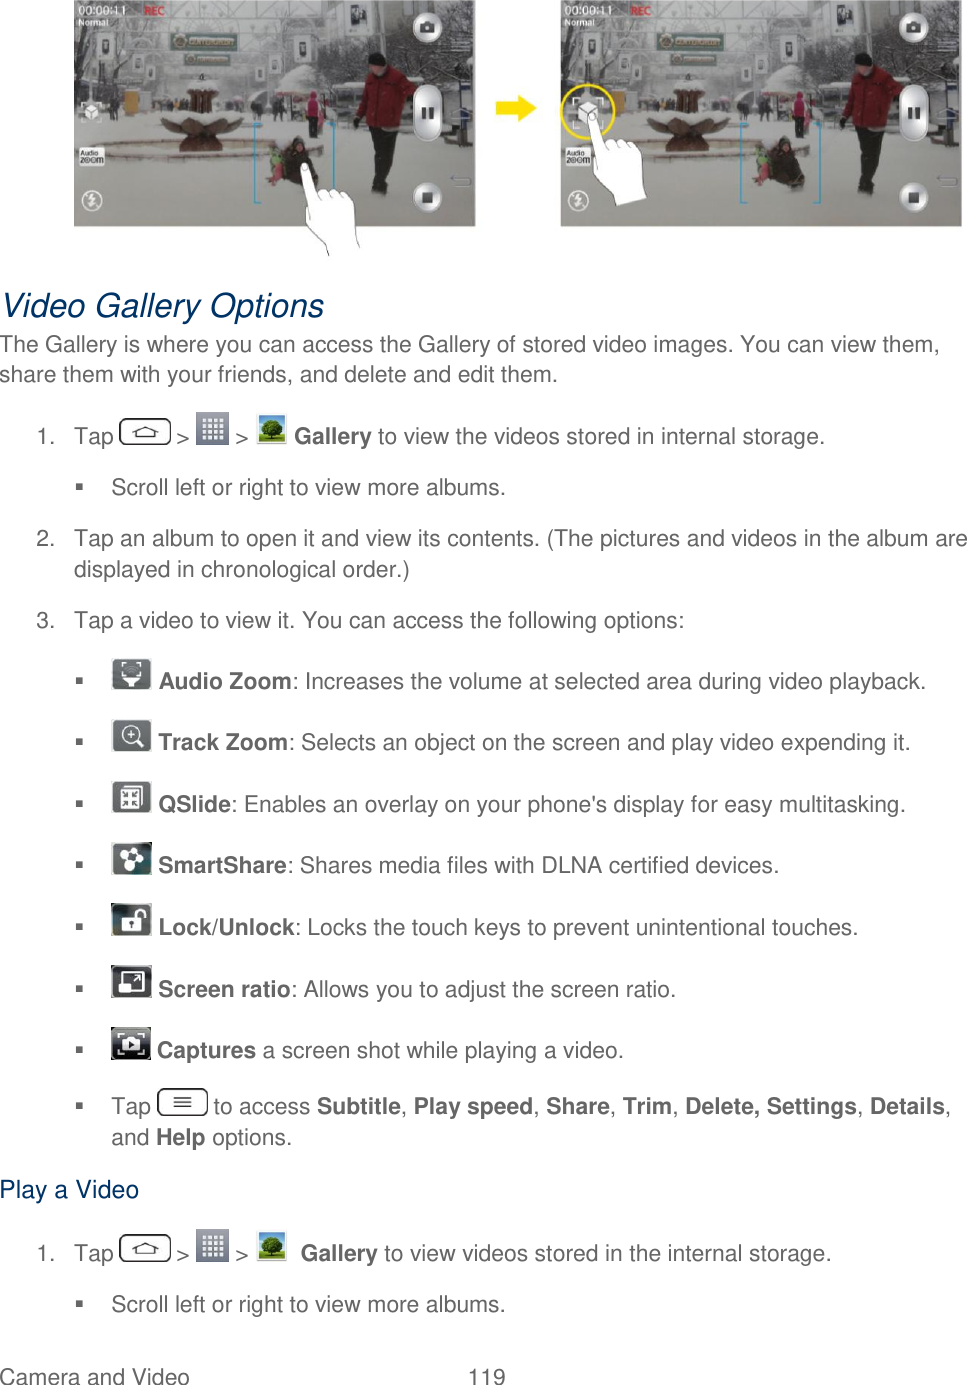  Camera and Video  119    Video Gallery Options The Gallery is where you can access the Gallery of stored video images. You can view them, share them with your friends, and delete and edit them. 1.  Tap   &gt;   &gt;   Gallery to view the videos stored in internal storage.   Scroll left or right to view more albums. 2.  Tap an album to open it and view its contents. (The pictures and videos in the album are displayed in chronological order.) 3.  Tap a video to view it. You can access the following options:   Audio Zoom: Increases the volume at selected area during video playback.   Track Zoom: Selects an object on the screen and play video expending it.    QSlide: Enables an overlay on your phone&apos;s display for easy multitasking.    SmartShare: Shares media files with DLNA certified devices.     Lock/Unlock: Locks the touch keys to prevent unintentional touches.    Screen ratio: Allows you to adjust the screen ratio.    Captures a screen shot while playing a video.   Tap   to access Subtitle, Play speed, Share, Trim, Delete, Settings, Details, and Help options. Play a Video 1.  Tap   &gt;   &gt;    Gallery to view videos stored in the internal storage.   Scroll left or right to view more albums. 